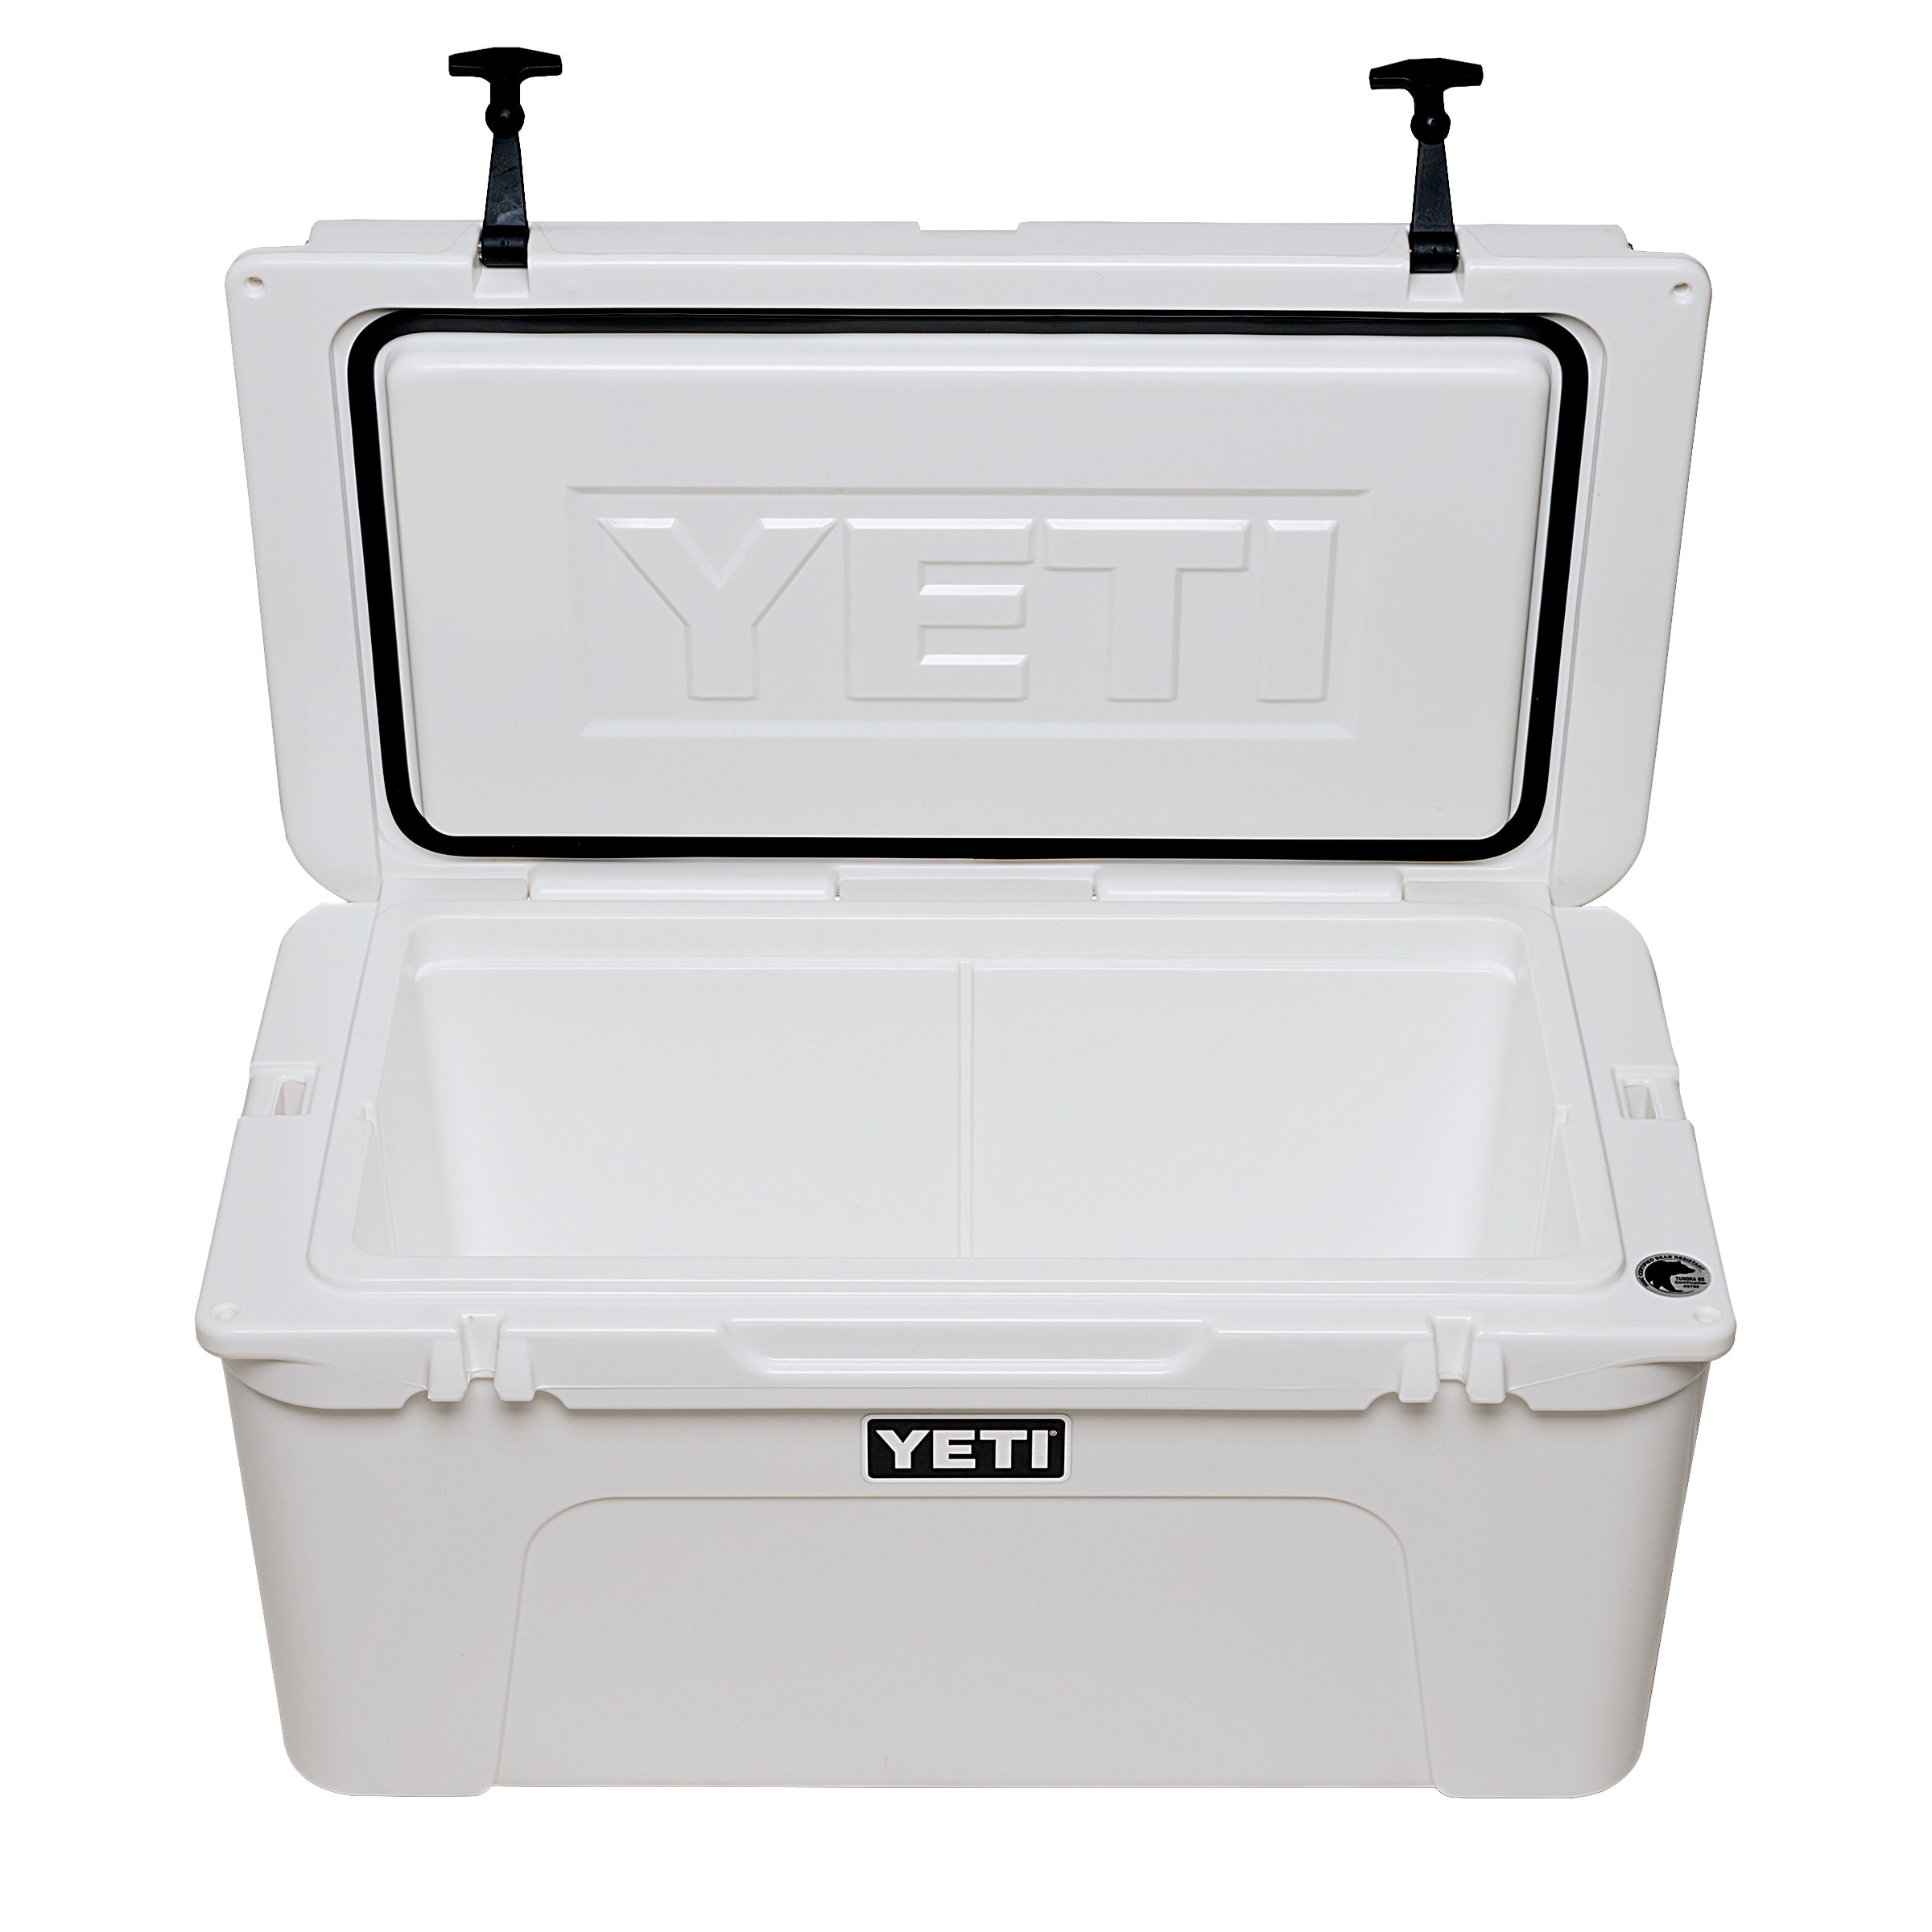 Personalized, YETI 65 Qt tundra, Cooler Lid Covers With 24 Inch Ruler, Yeti  Cooler Accessories, Closed Cell Eva Foam, Non-skid Surface 